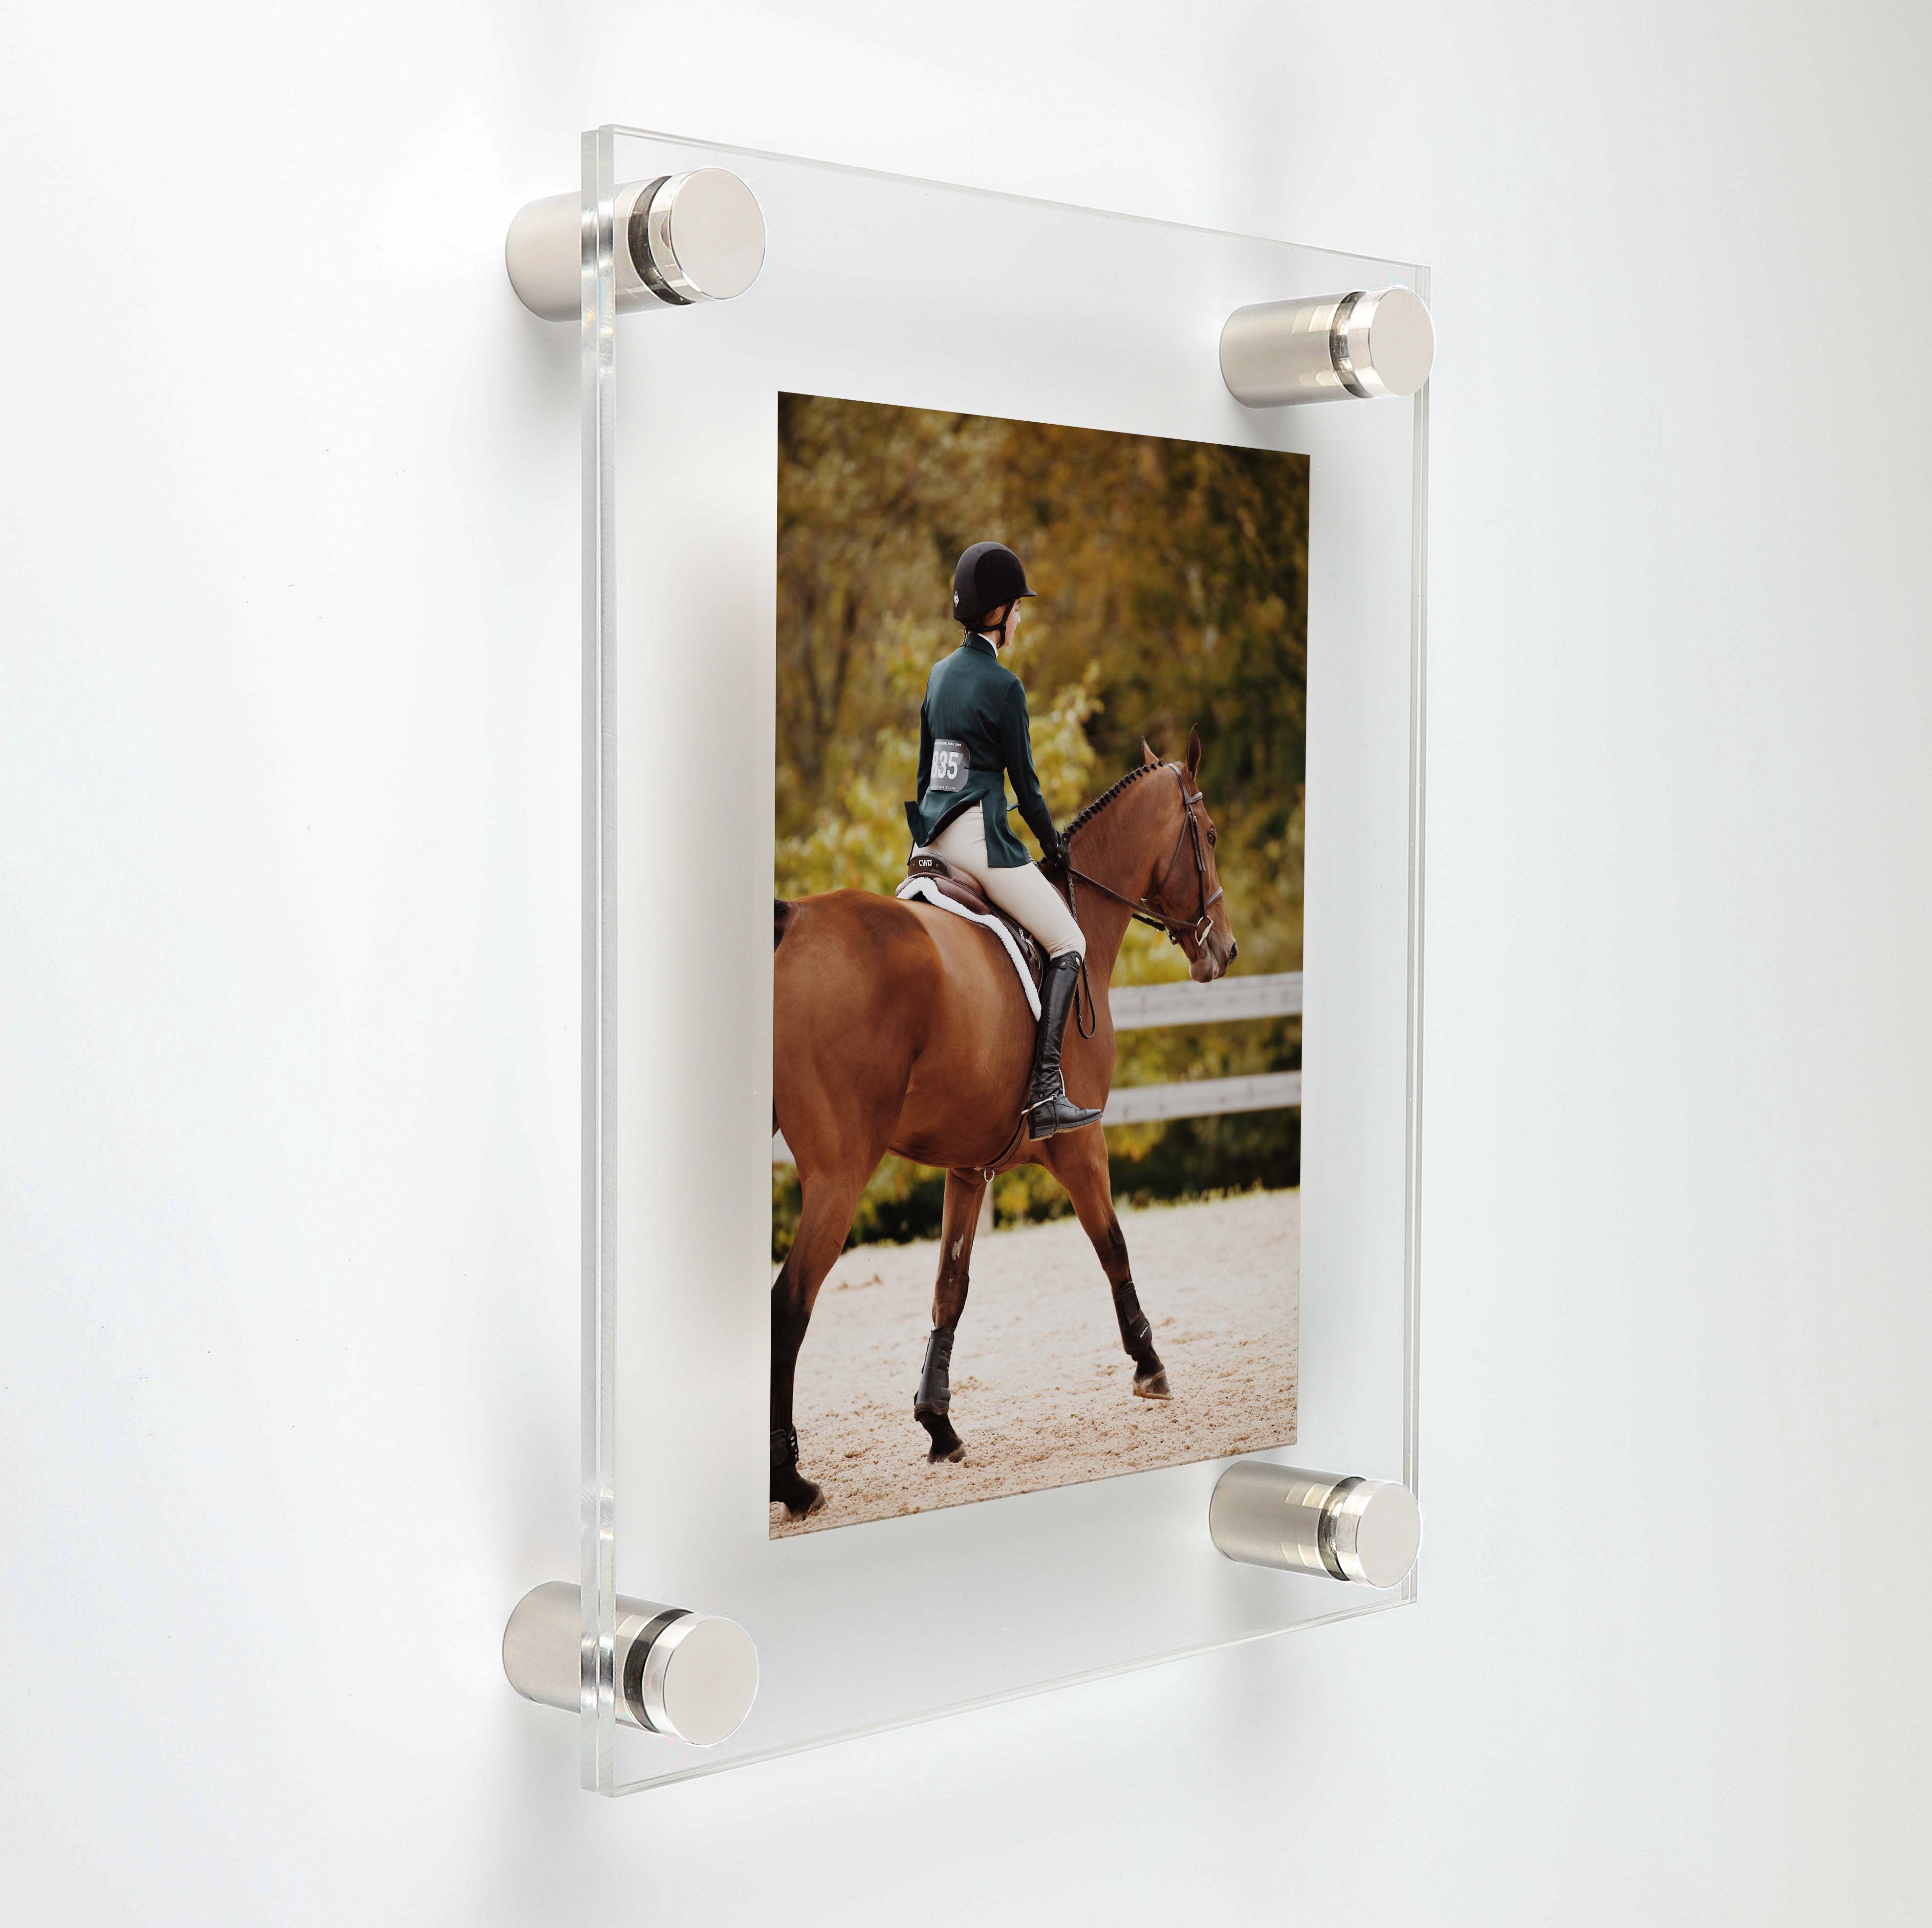 (2) 19-3/4'' x 26'' Clear Acrylics , Pre-Drilled With Polished Edges (Thick 3/16'' each), Wall Frame with (4) 5/8'' x 1'' Polished Stainless Steel Standoffs includes Screws and Anchors